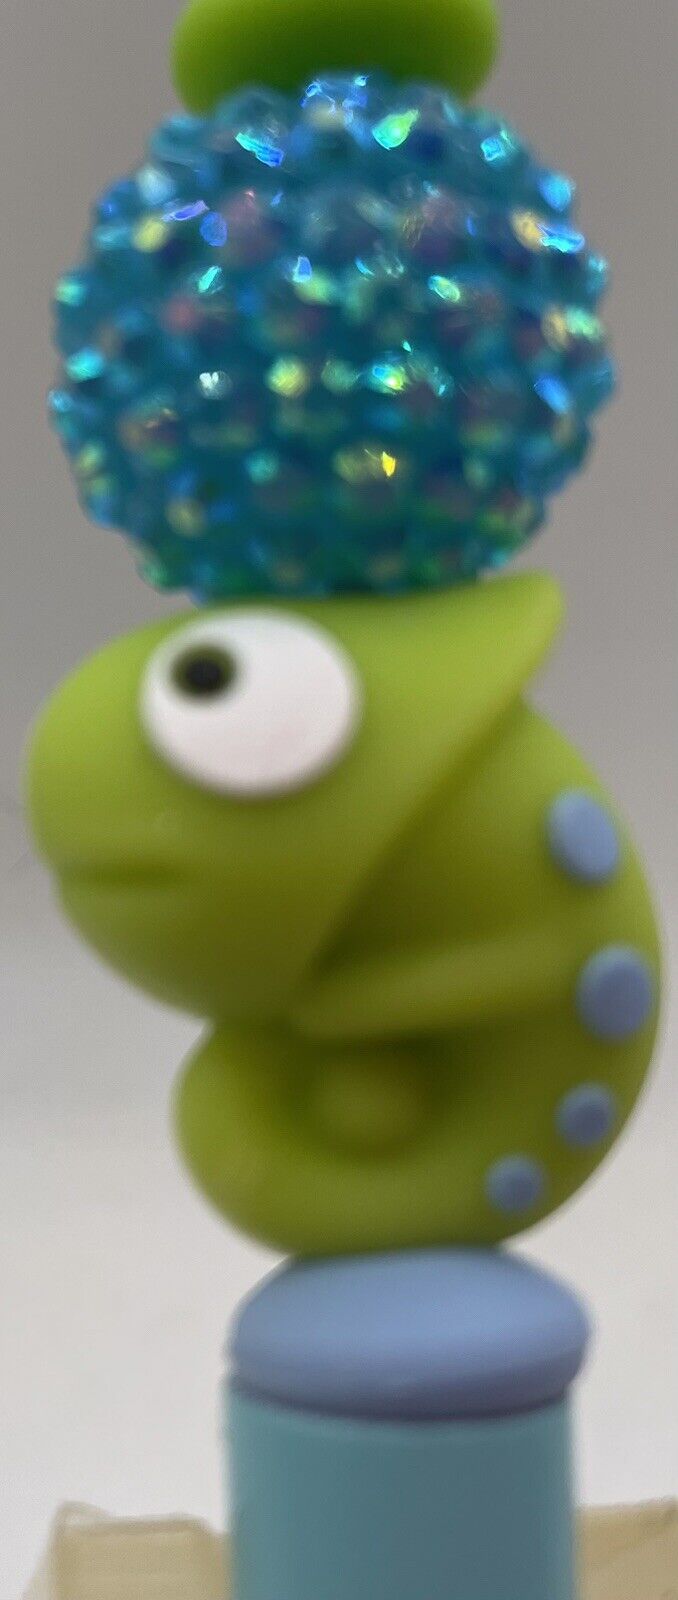 Beaded Ballpoint Pen ..cute Chameleon With Blue And Green Beads